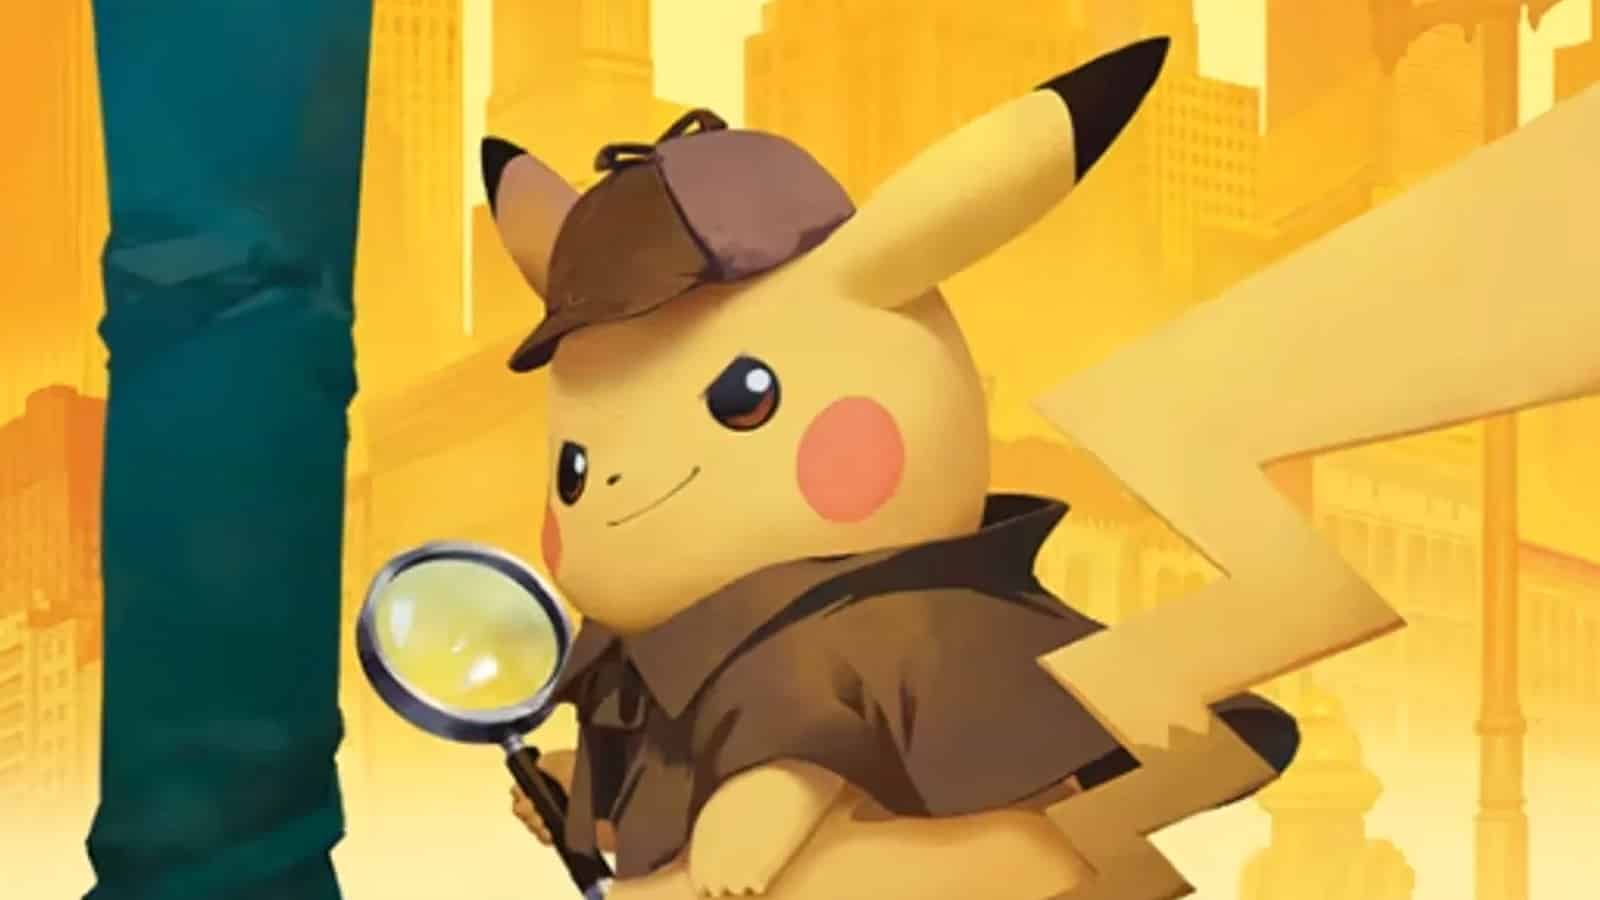 The Latest Info on the Nintendo Switch Game Detective Pikachu Returns!, News & Updates